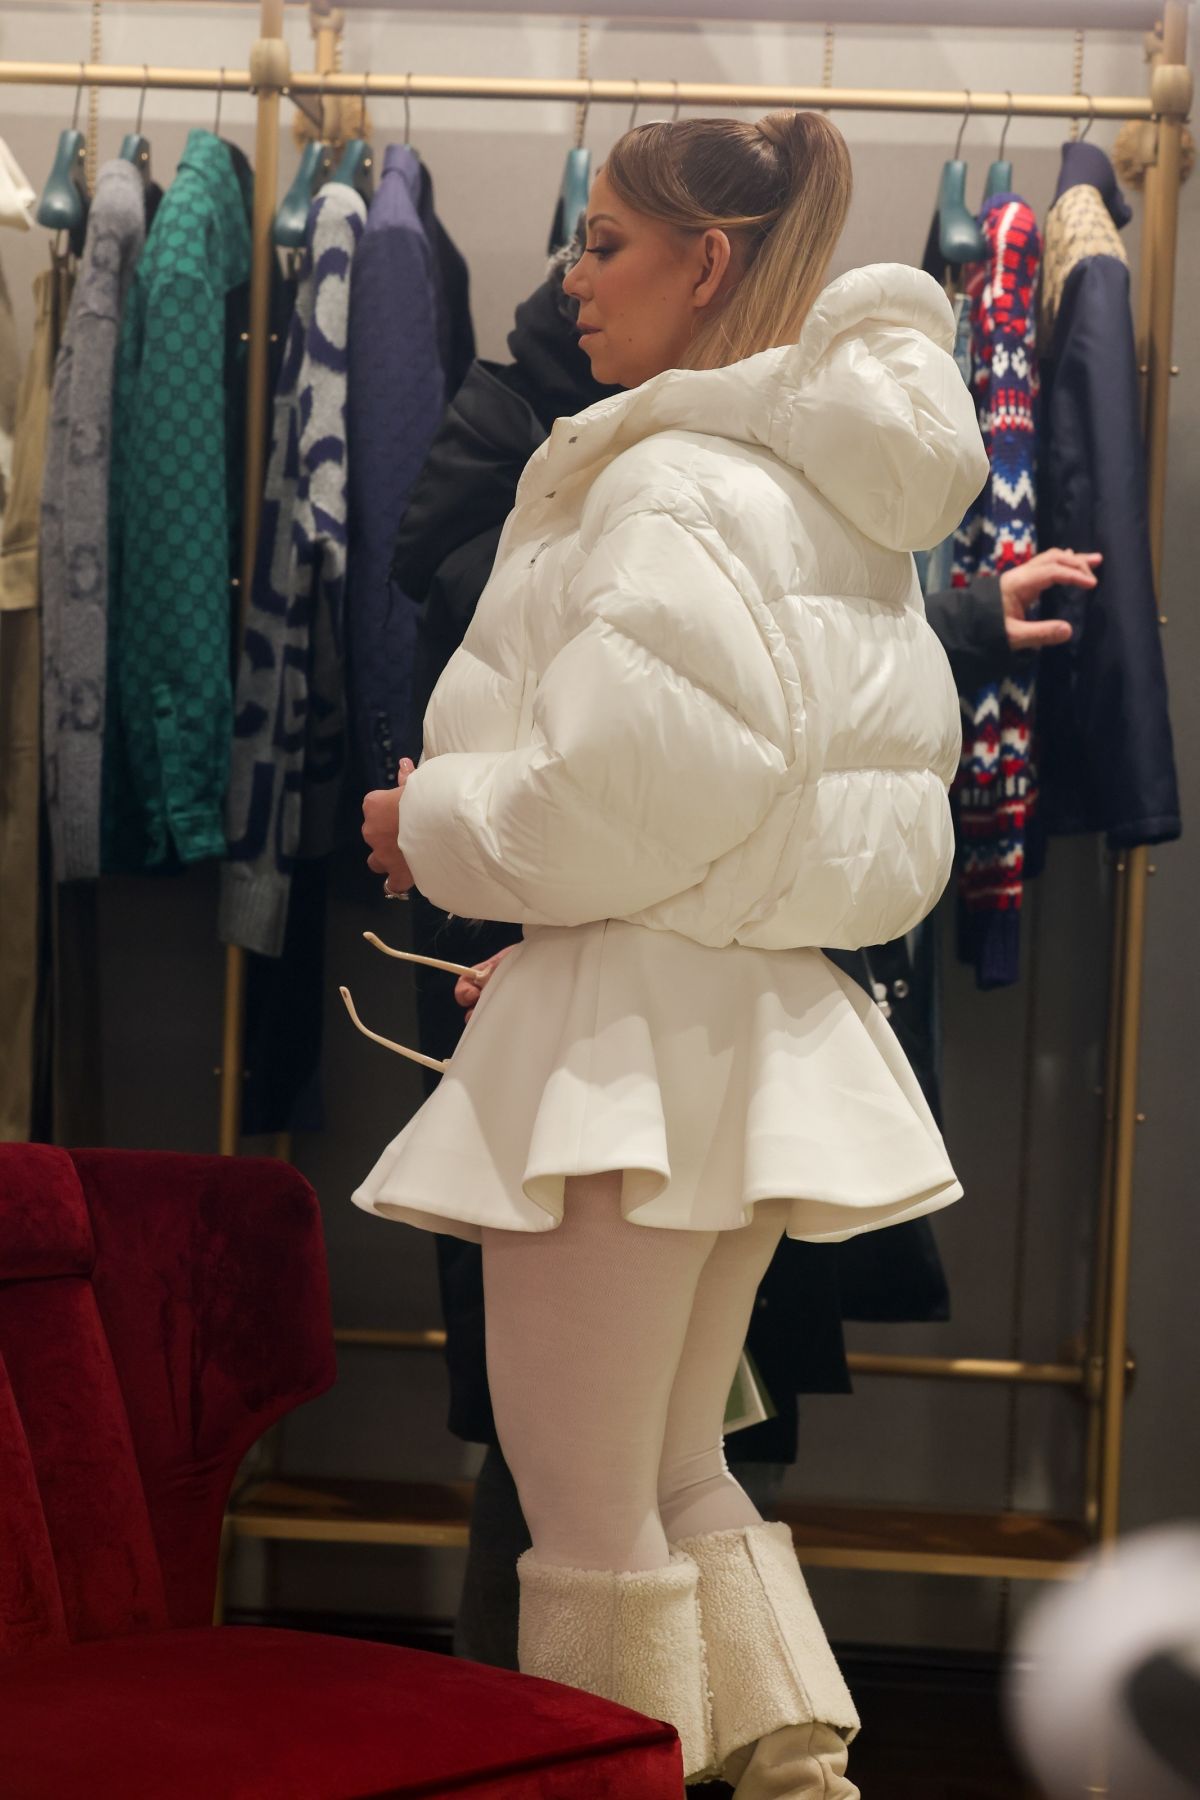 Mariah Carey in White Puffer Jacket and Dress in Aspen 3